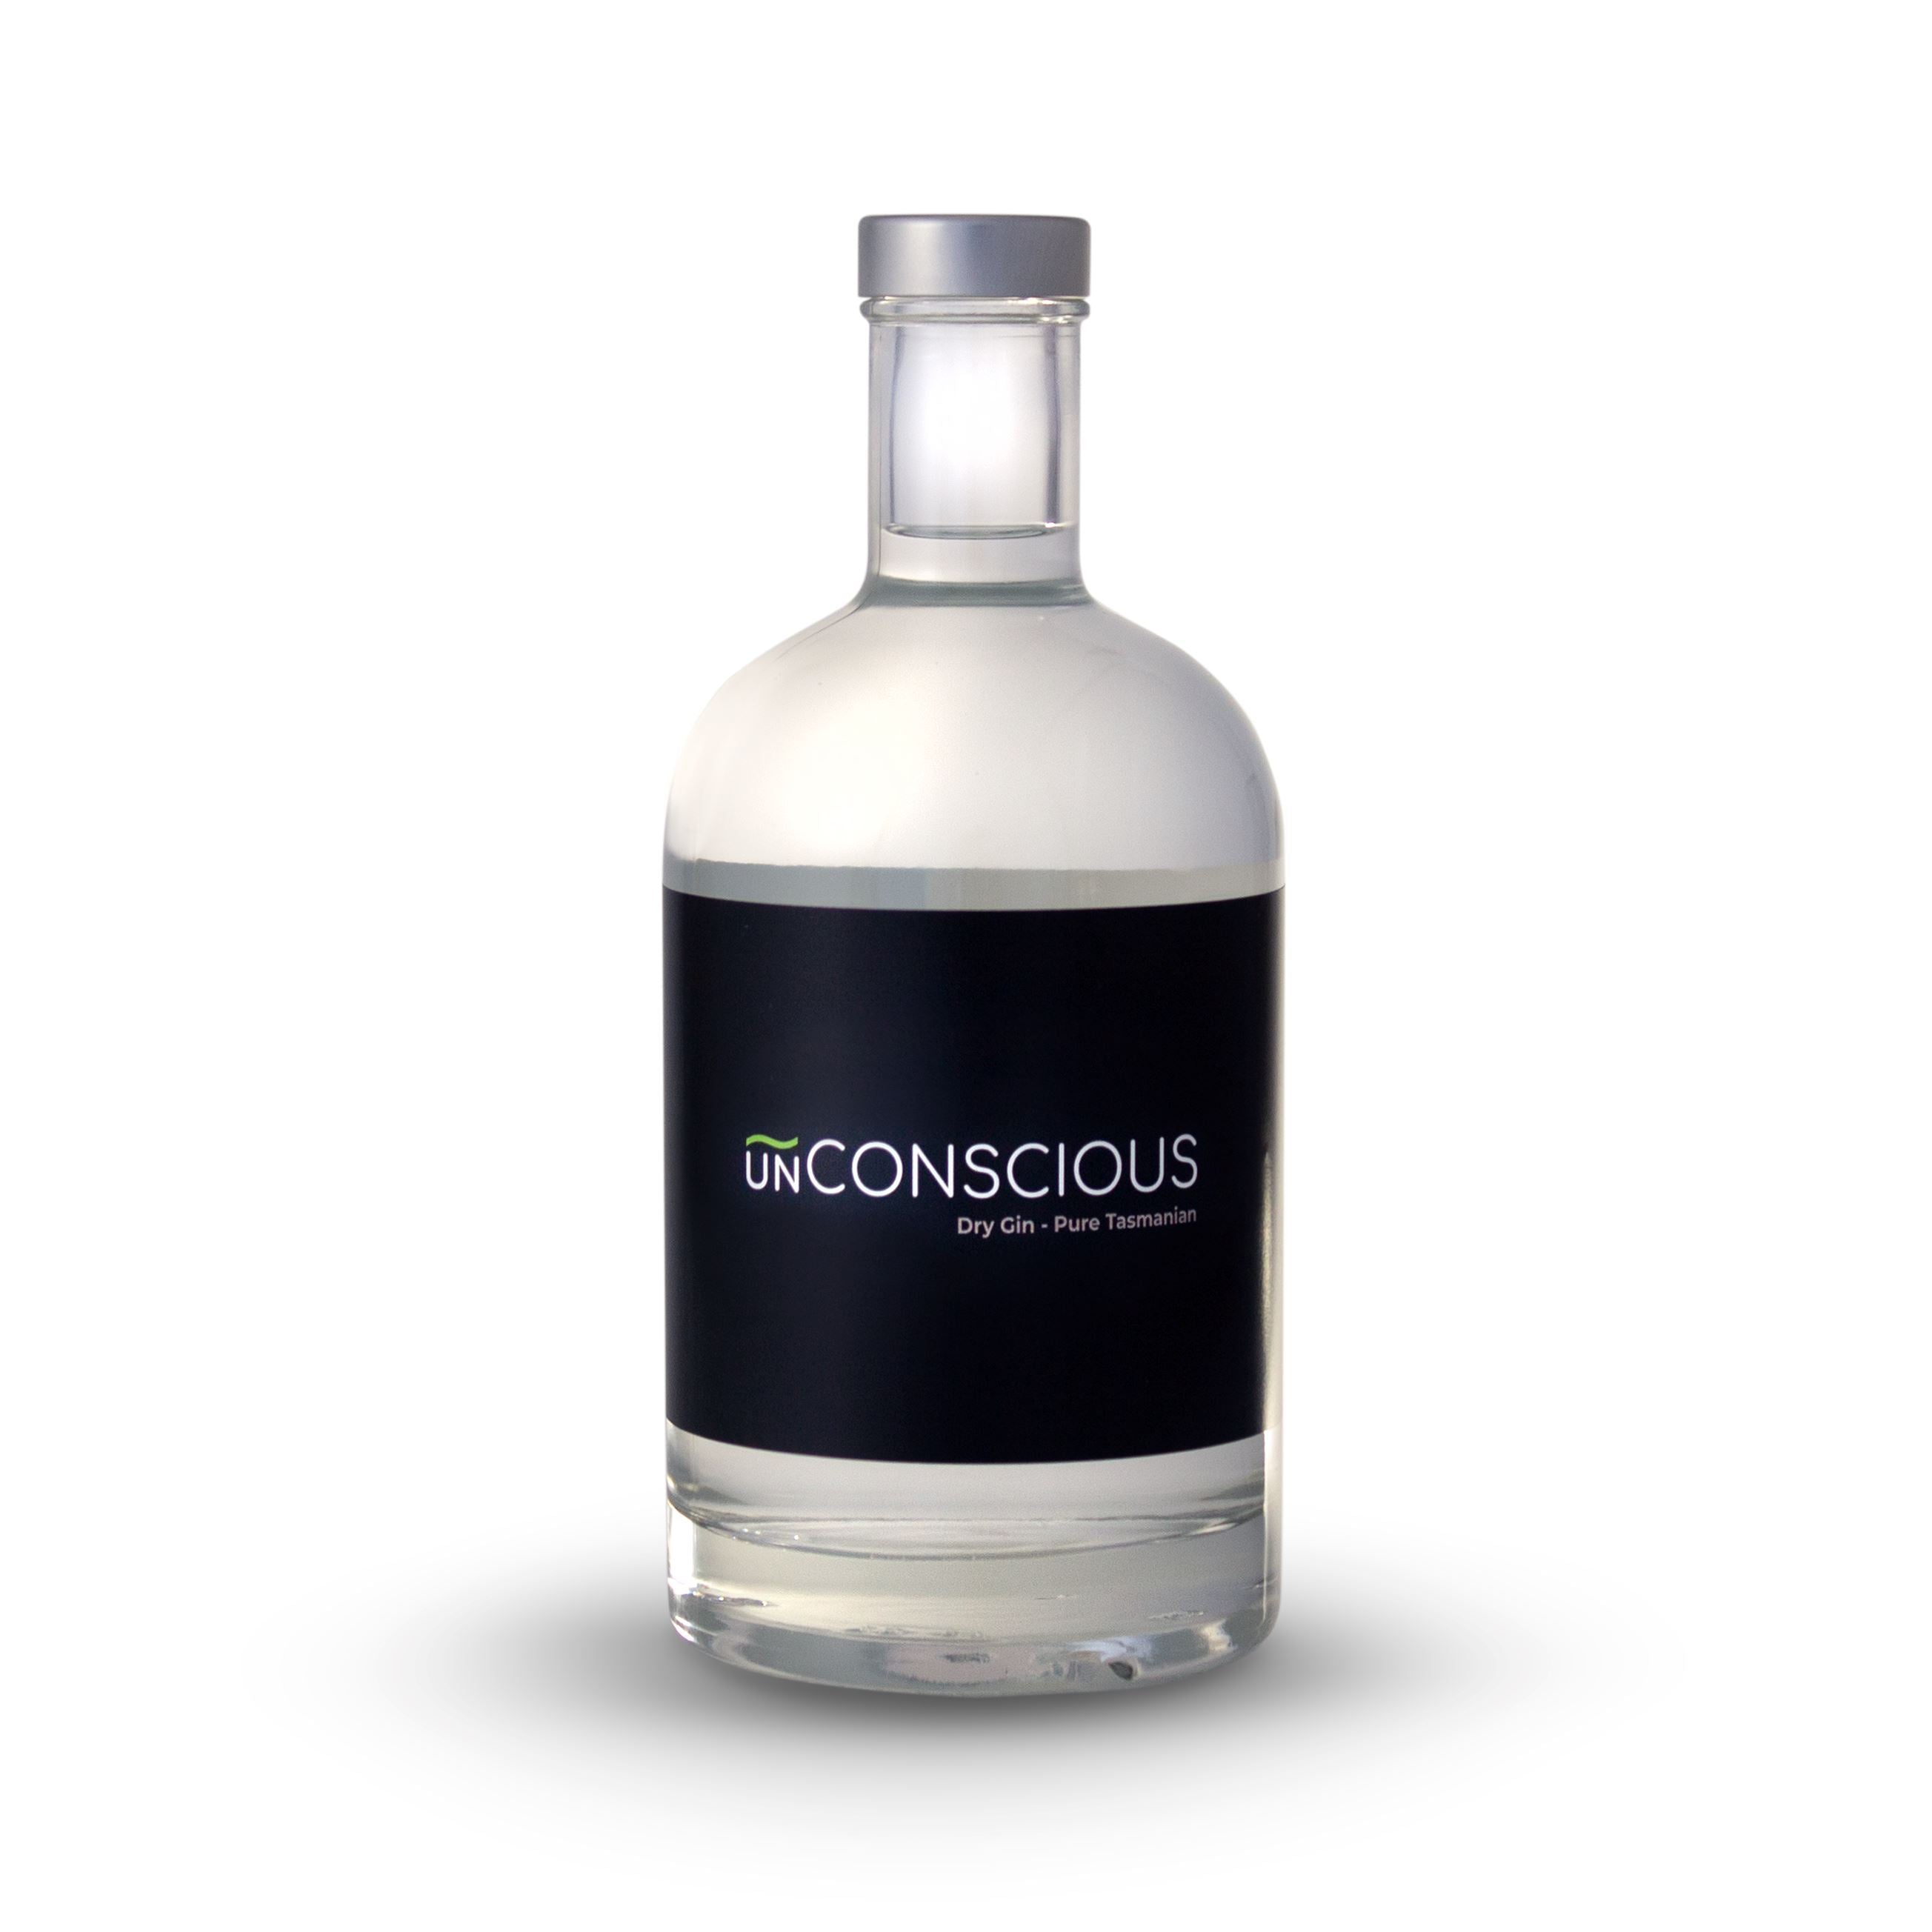 A bottle of Dry gin on a white background. It is a clear spirit and bottle, with a simple black label that has the logo on it. 